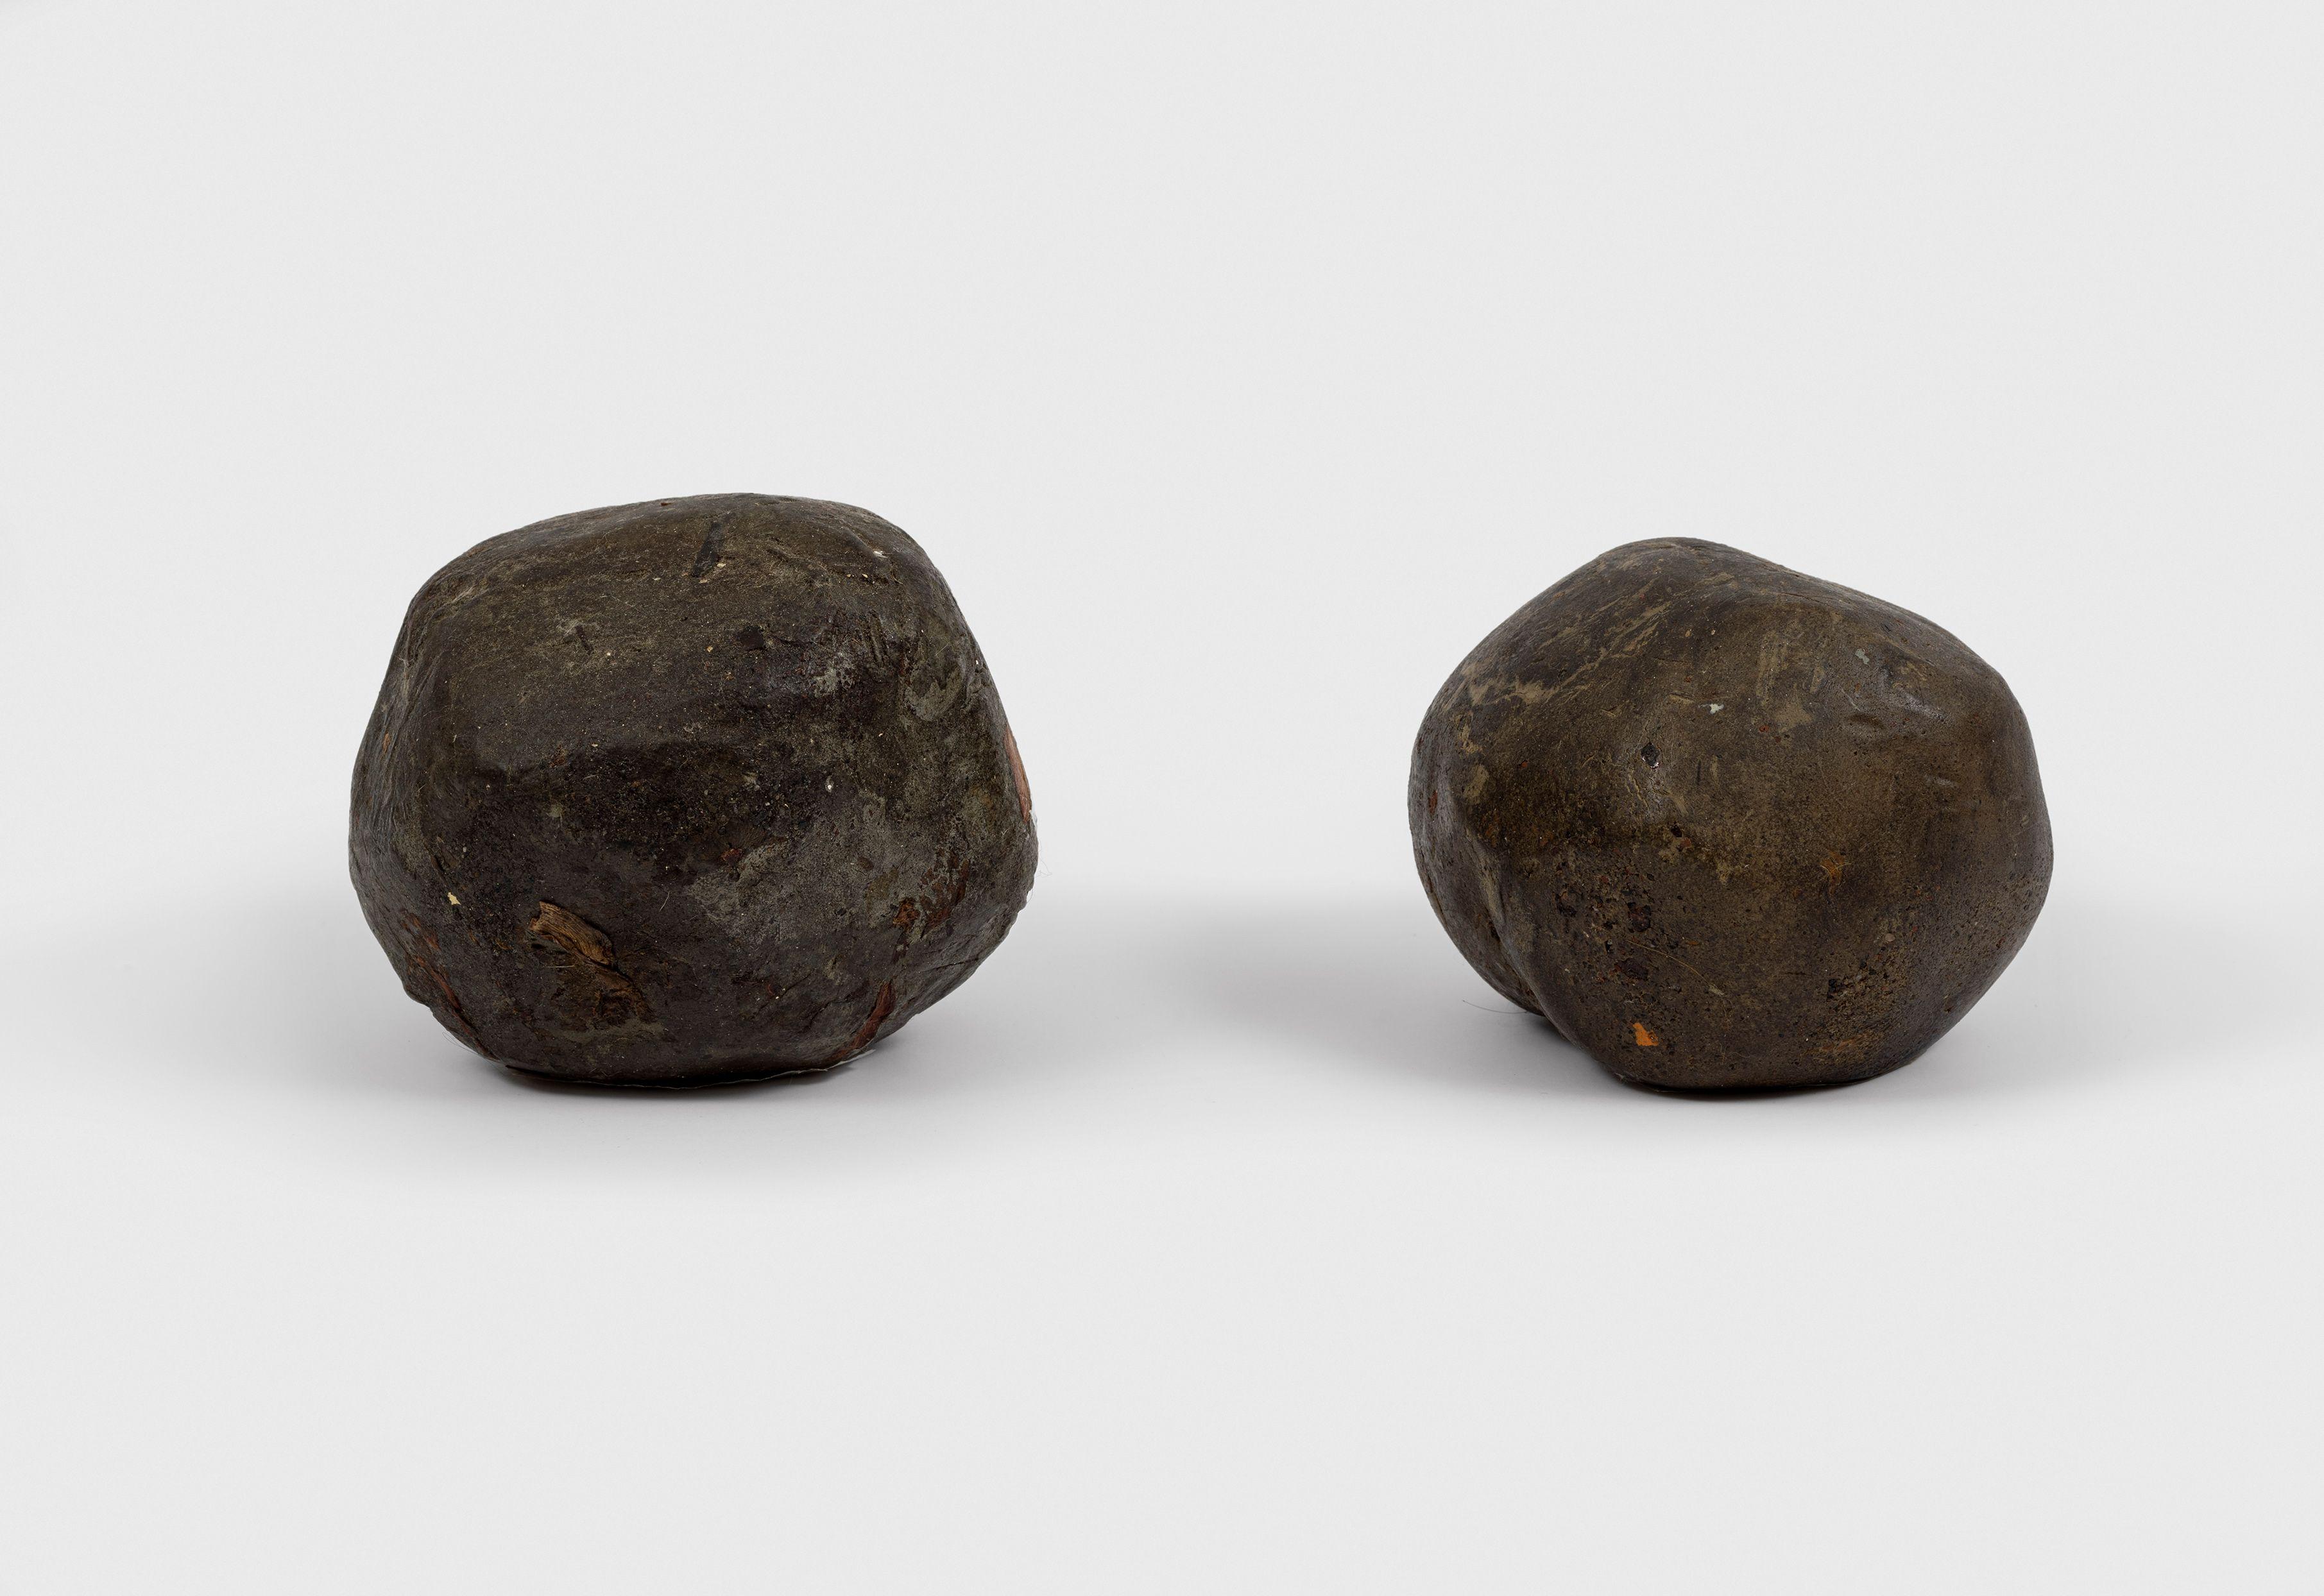 Model (Two Yielding Stones), from Working Table objects